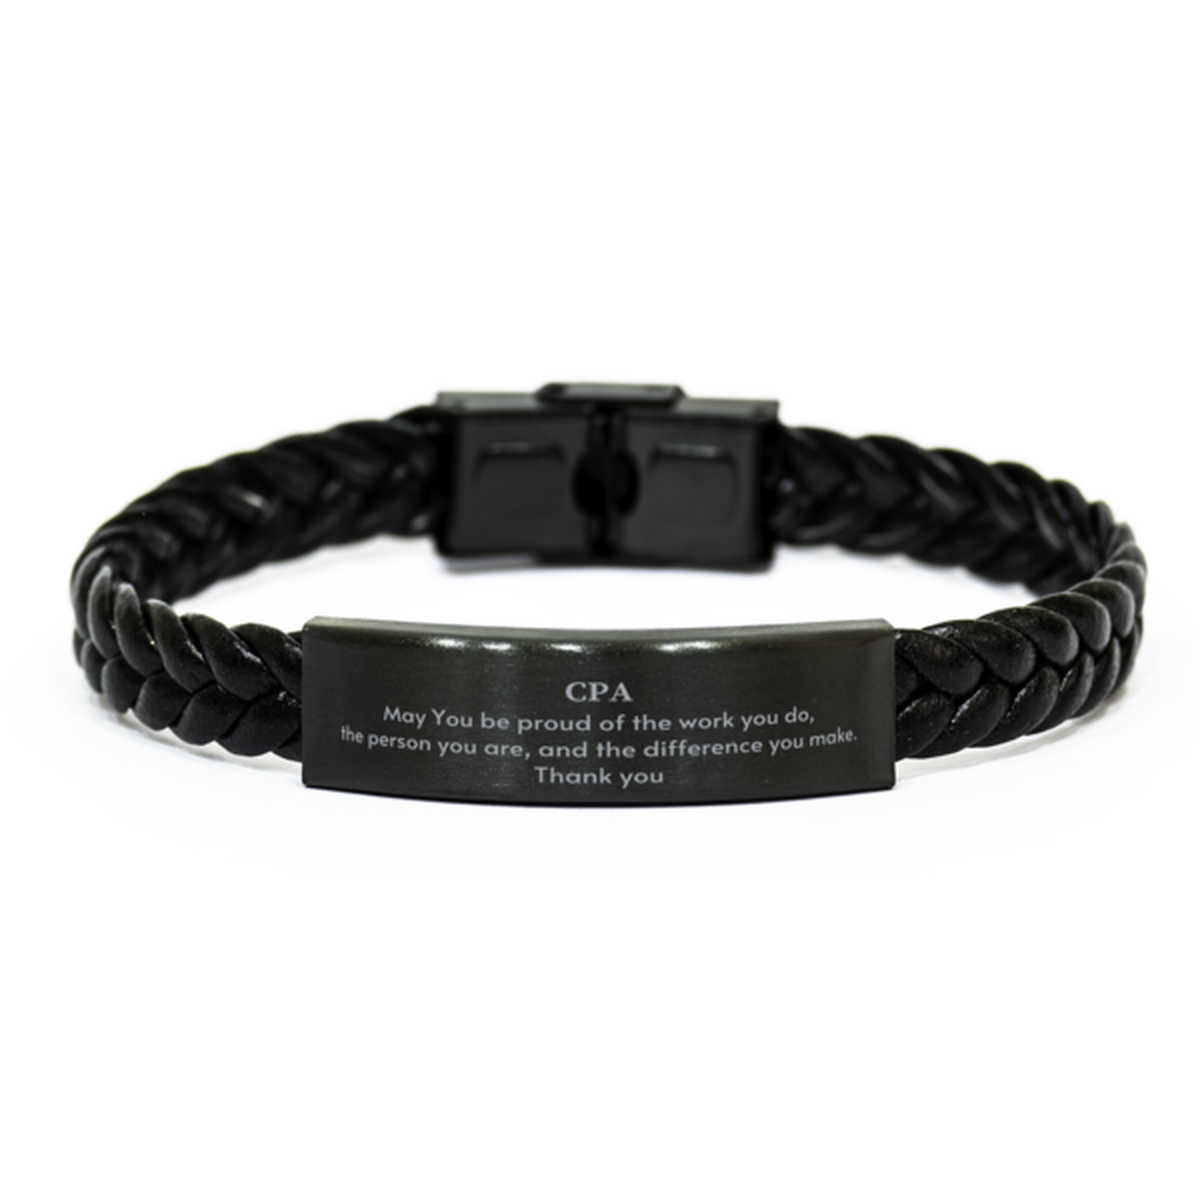 Heartwarming Braided Leather Bracelet Retirement Coworkers Gifts for CPA, CPA May You be proud of the work you do, the person you are Gifts for Boss Men Women Friends